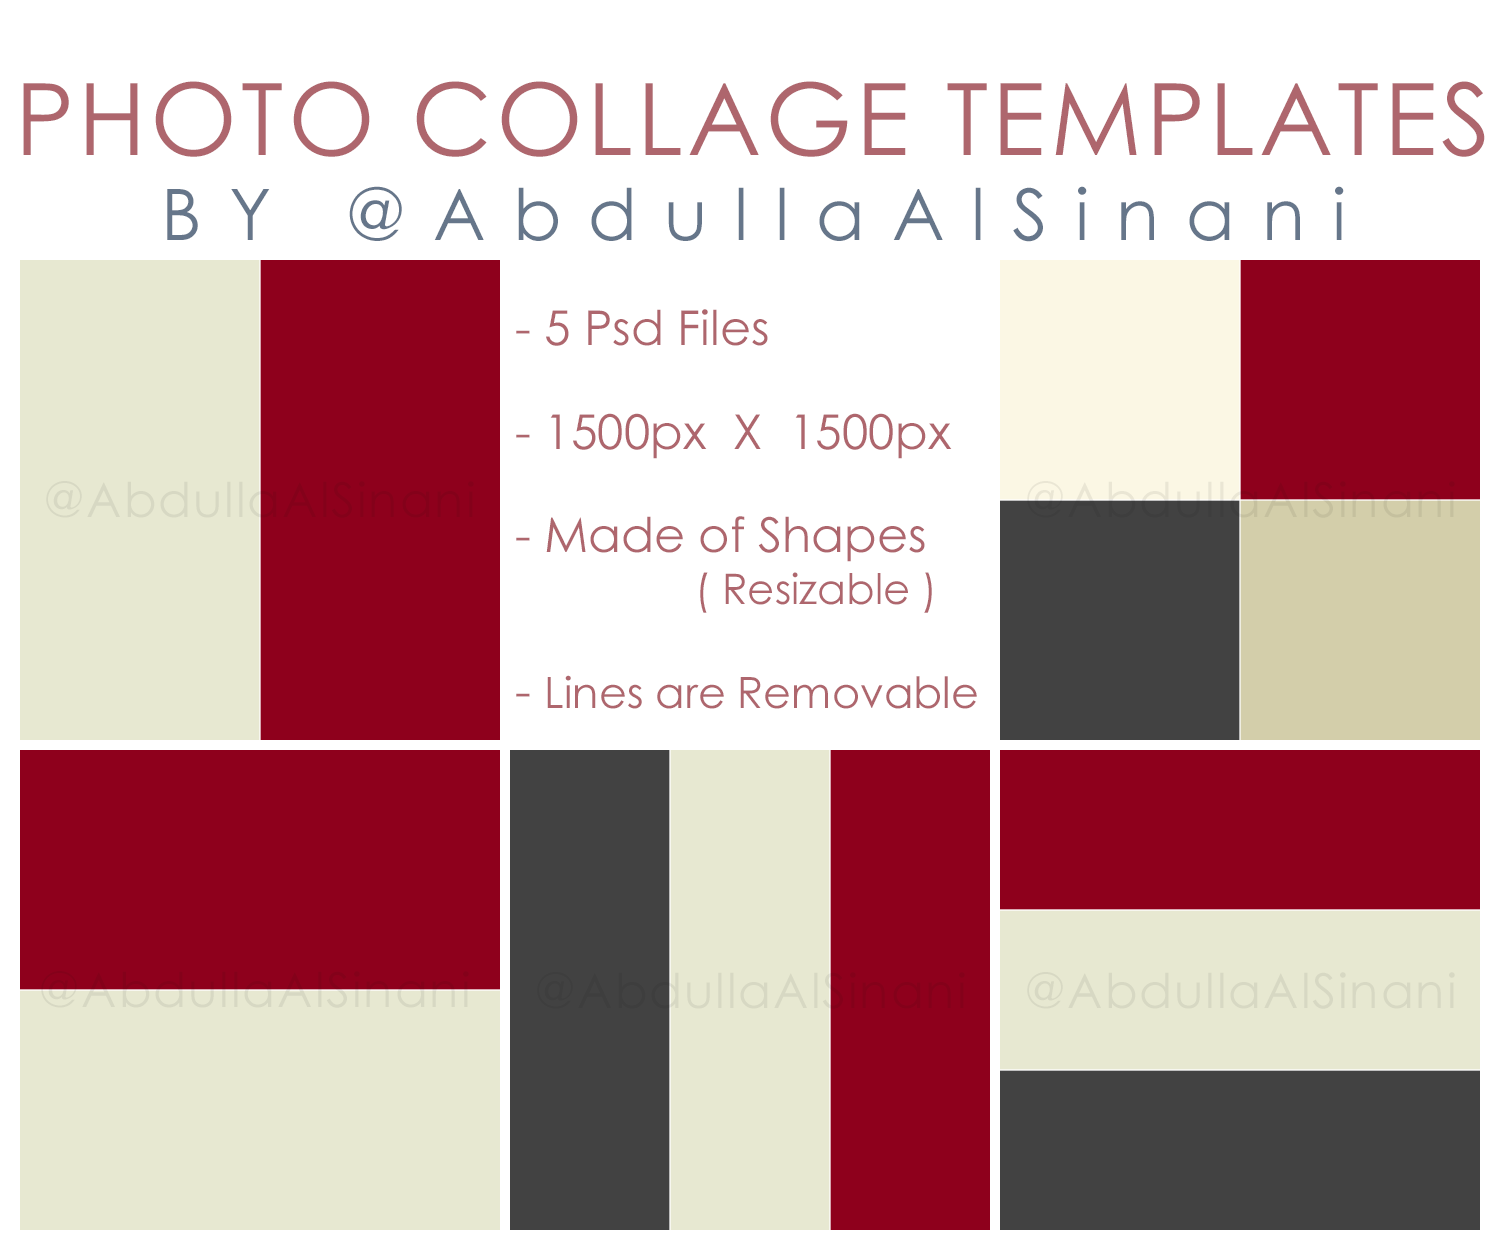 Photo Collage Templates - For web and Instagram